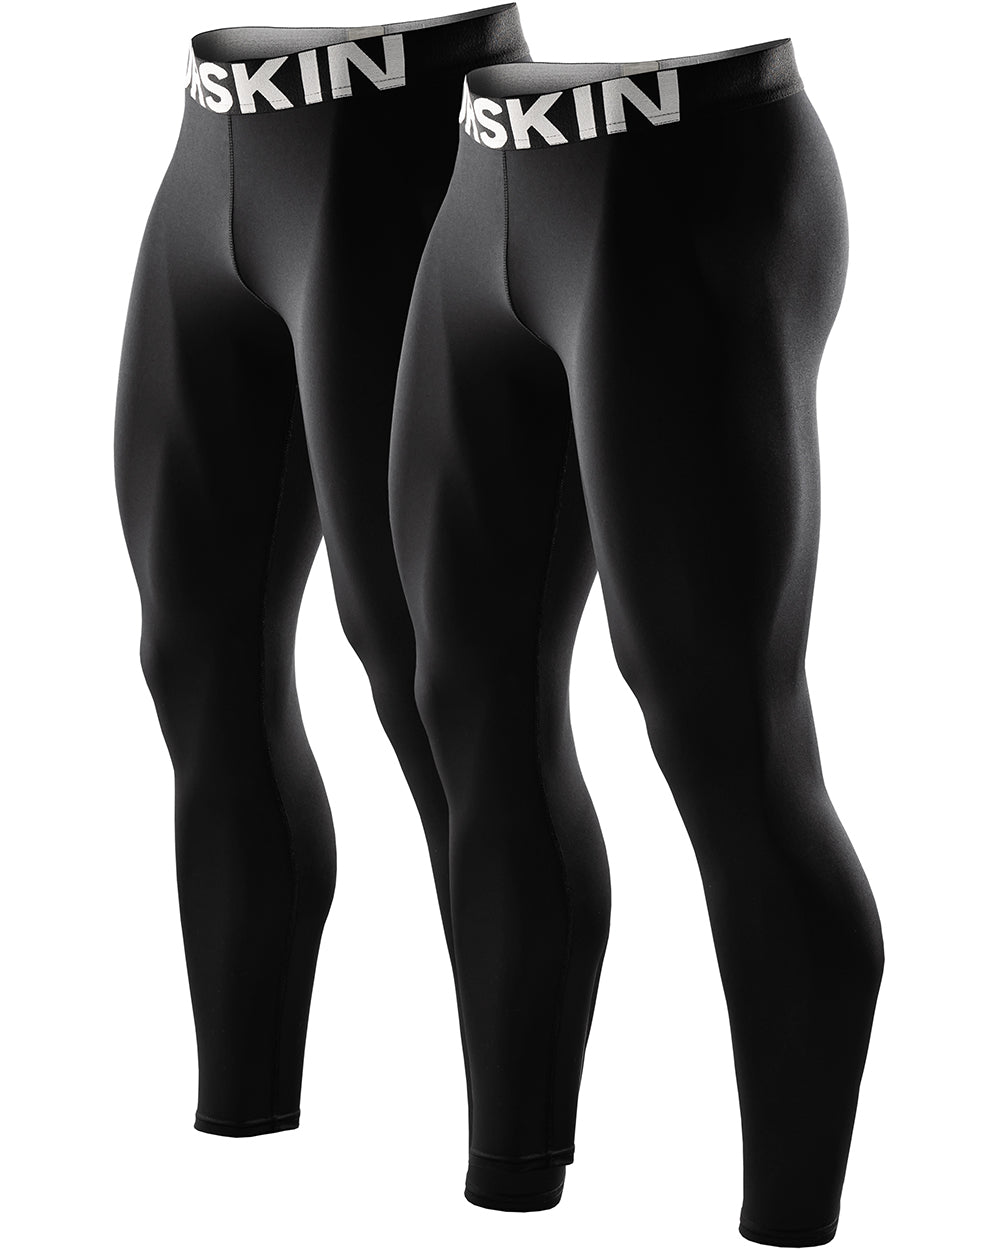  N/ A Mens Compression Tights Pants,Men's (Pack of 1, 2